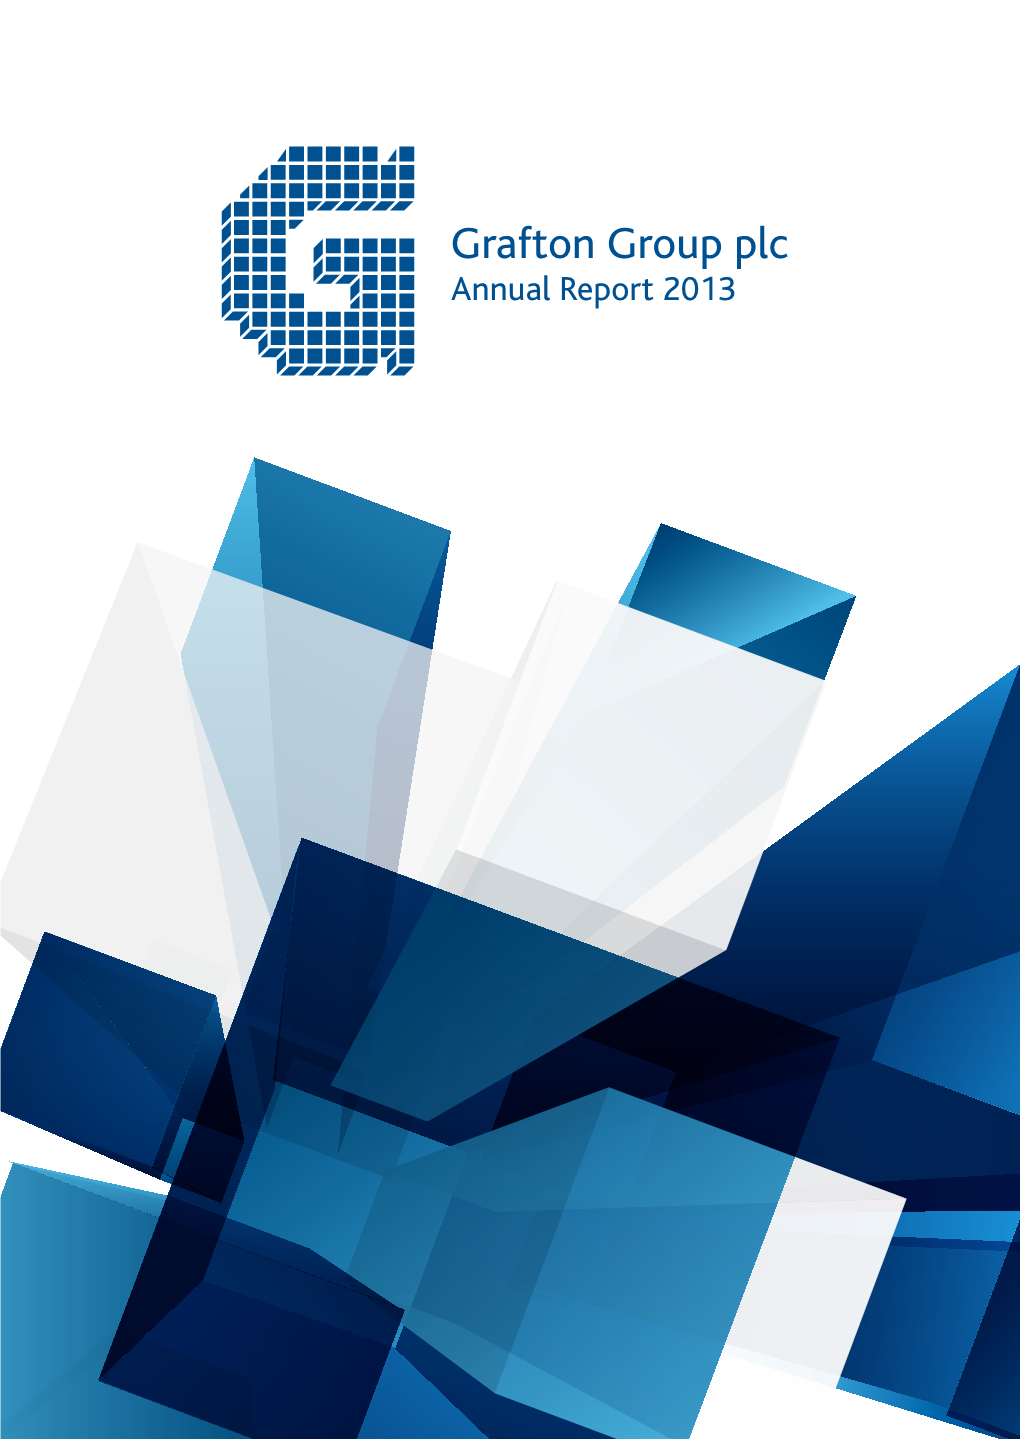 Grafton Group Plc Annual Report 2013 Contents